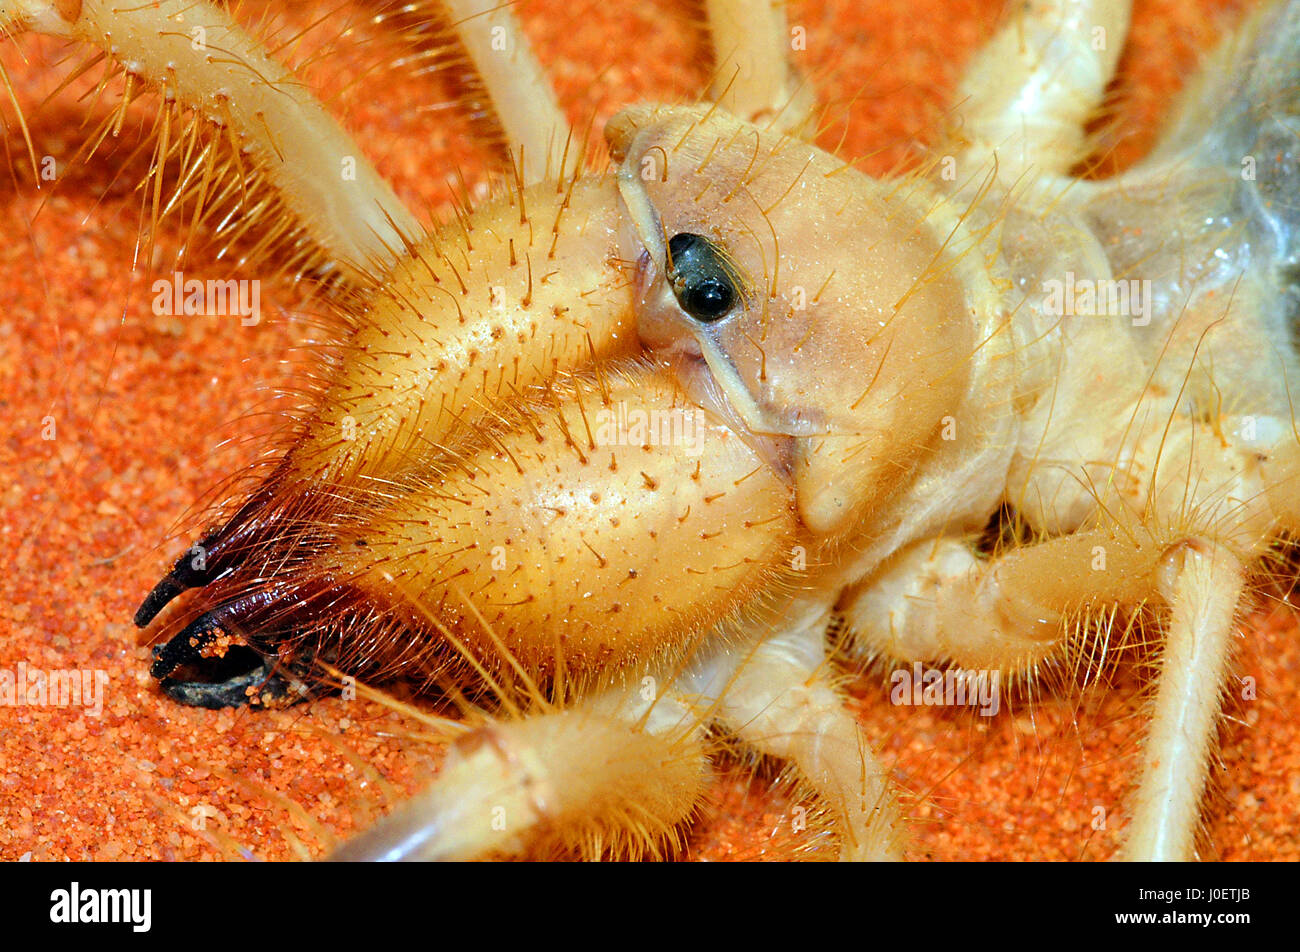 Camel spider close-up of head Stock Photo